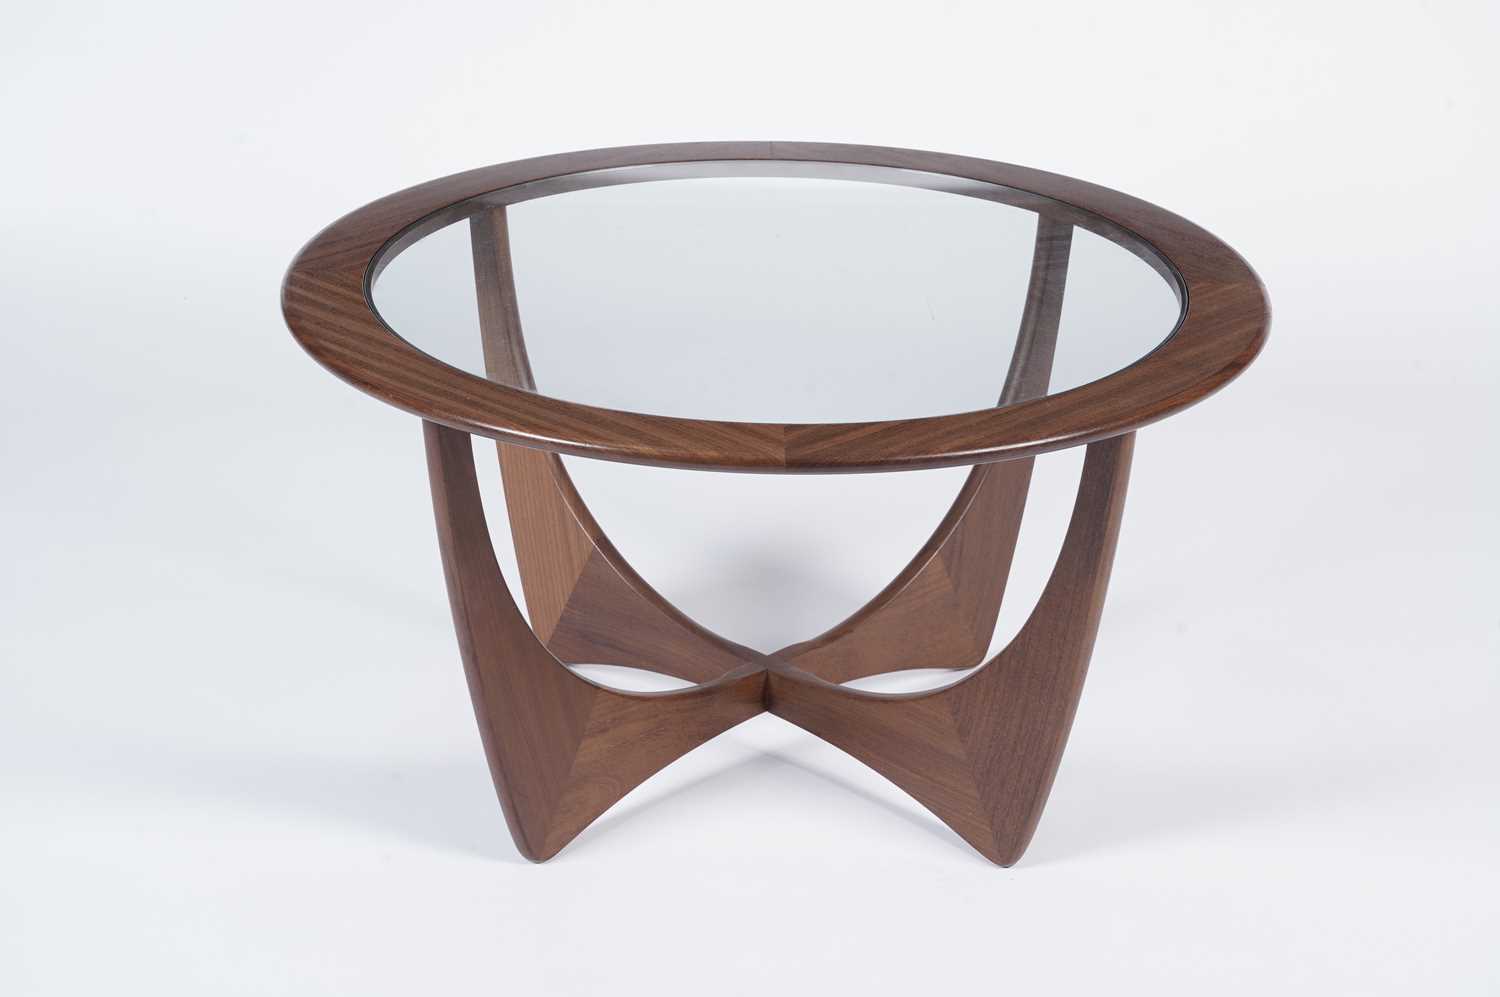 Victor B. Wilkins for G-Plan: an 'Astro' coffee table